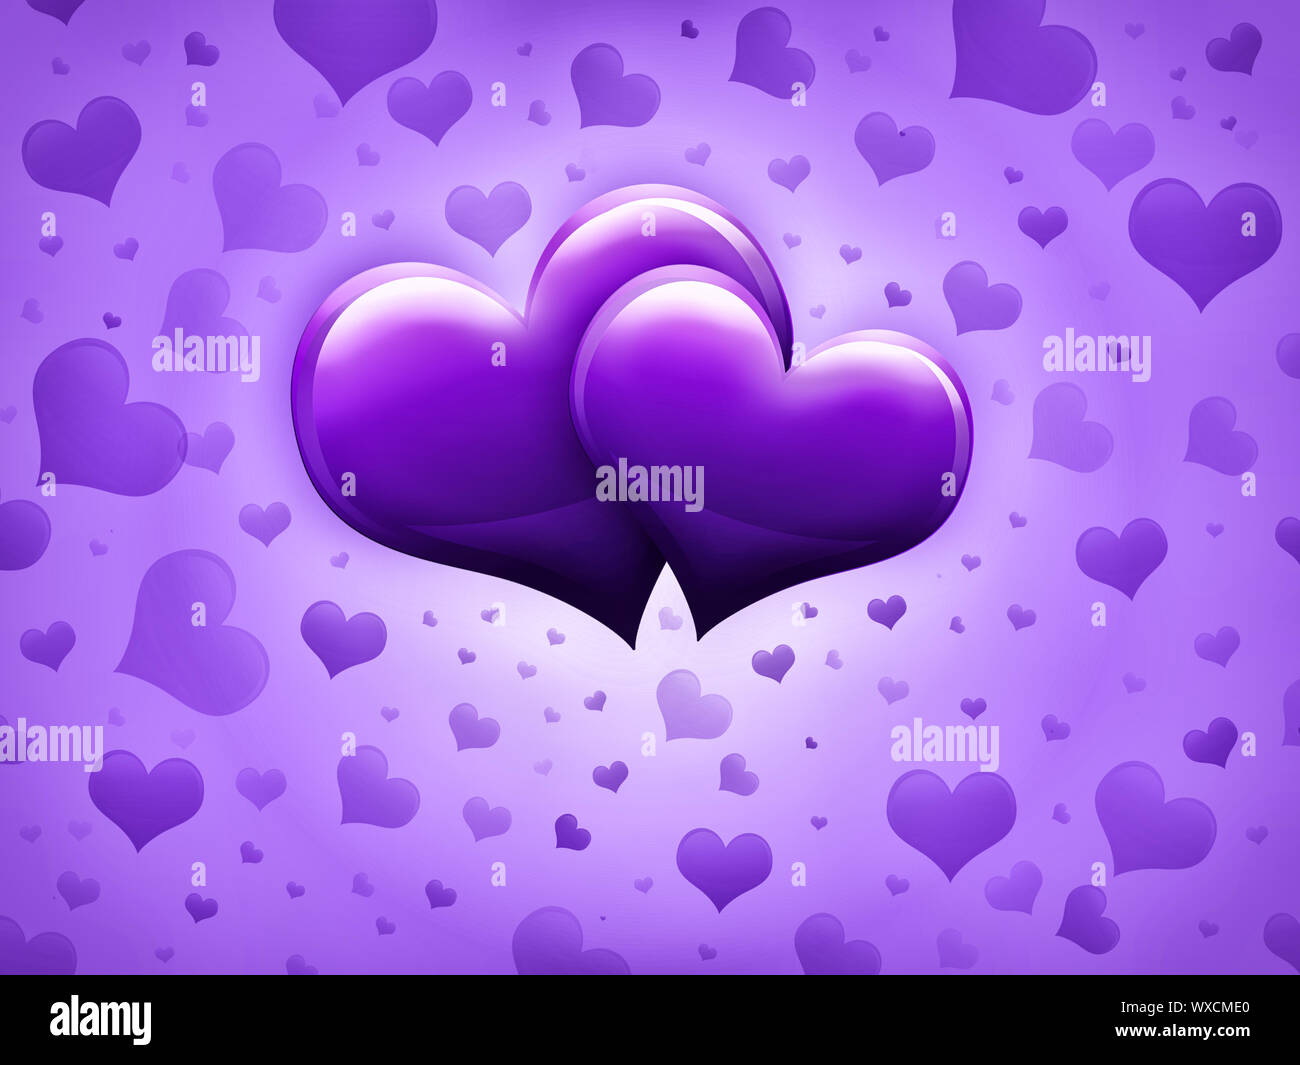 Valentines Day Card with two big purple hearts and many smaller hearts on a purple background Stock Photo